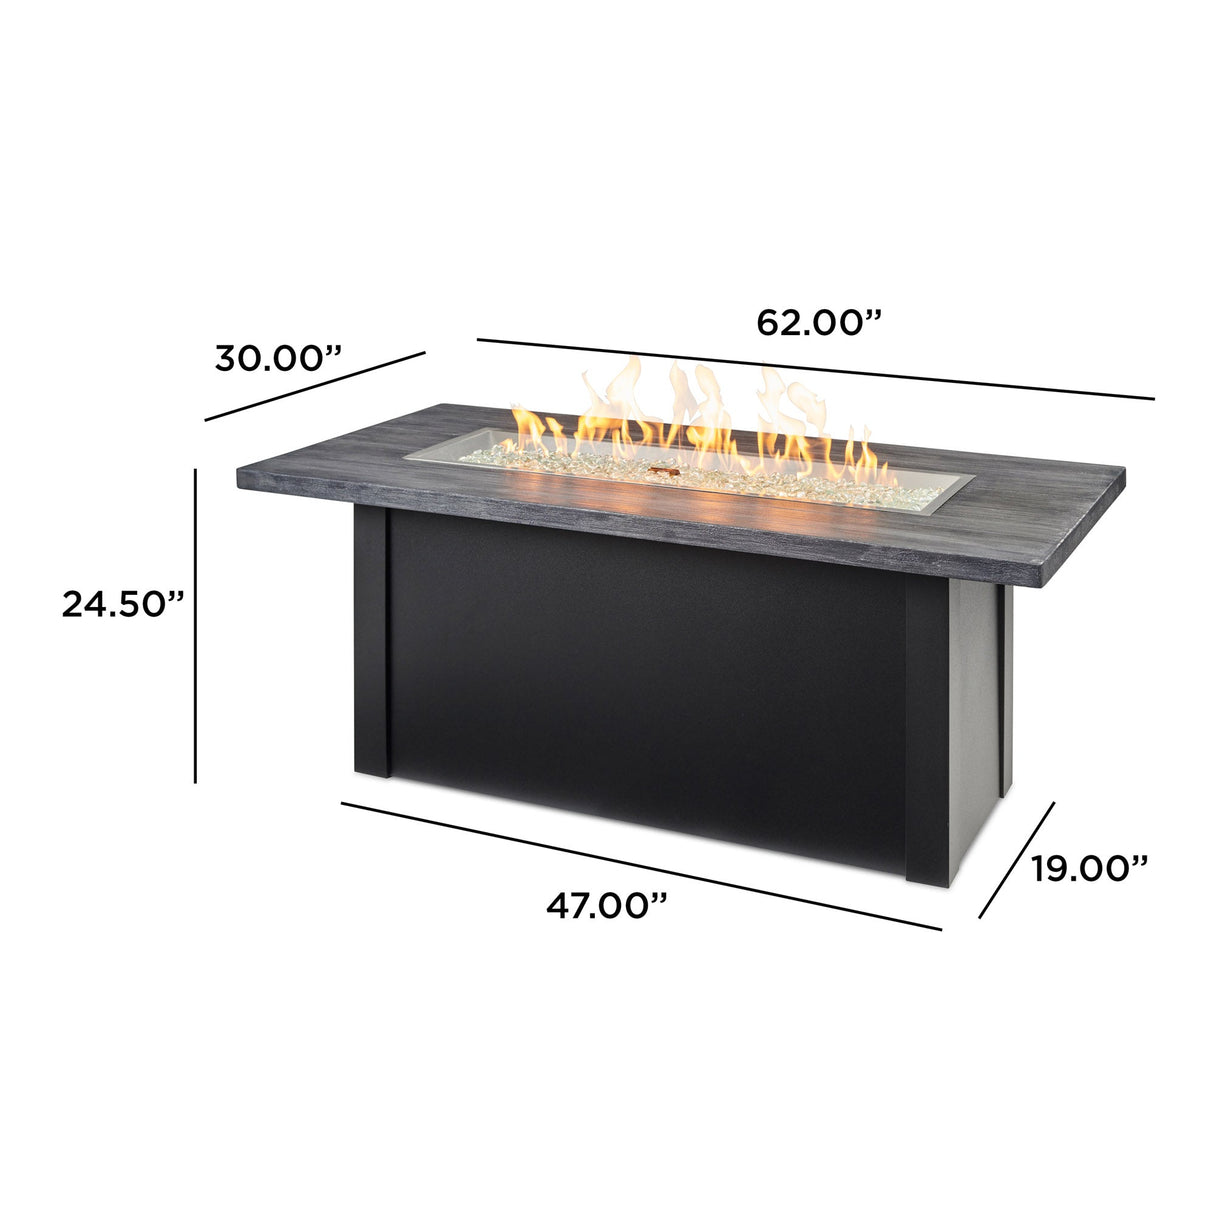 Dimensions overlaid on a Havenwood Linear Gas Fire Pit Table with the Carbon Grey top and Luverne Black base